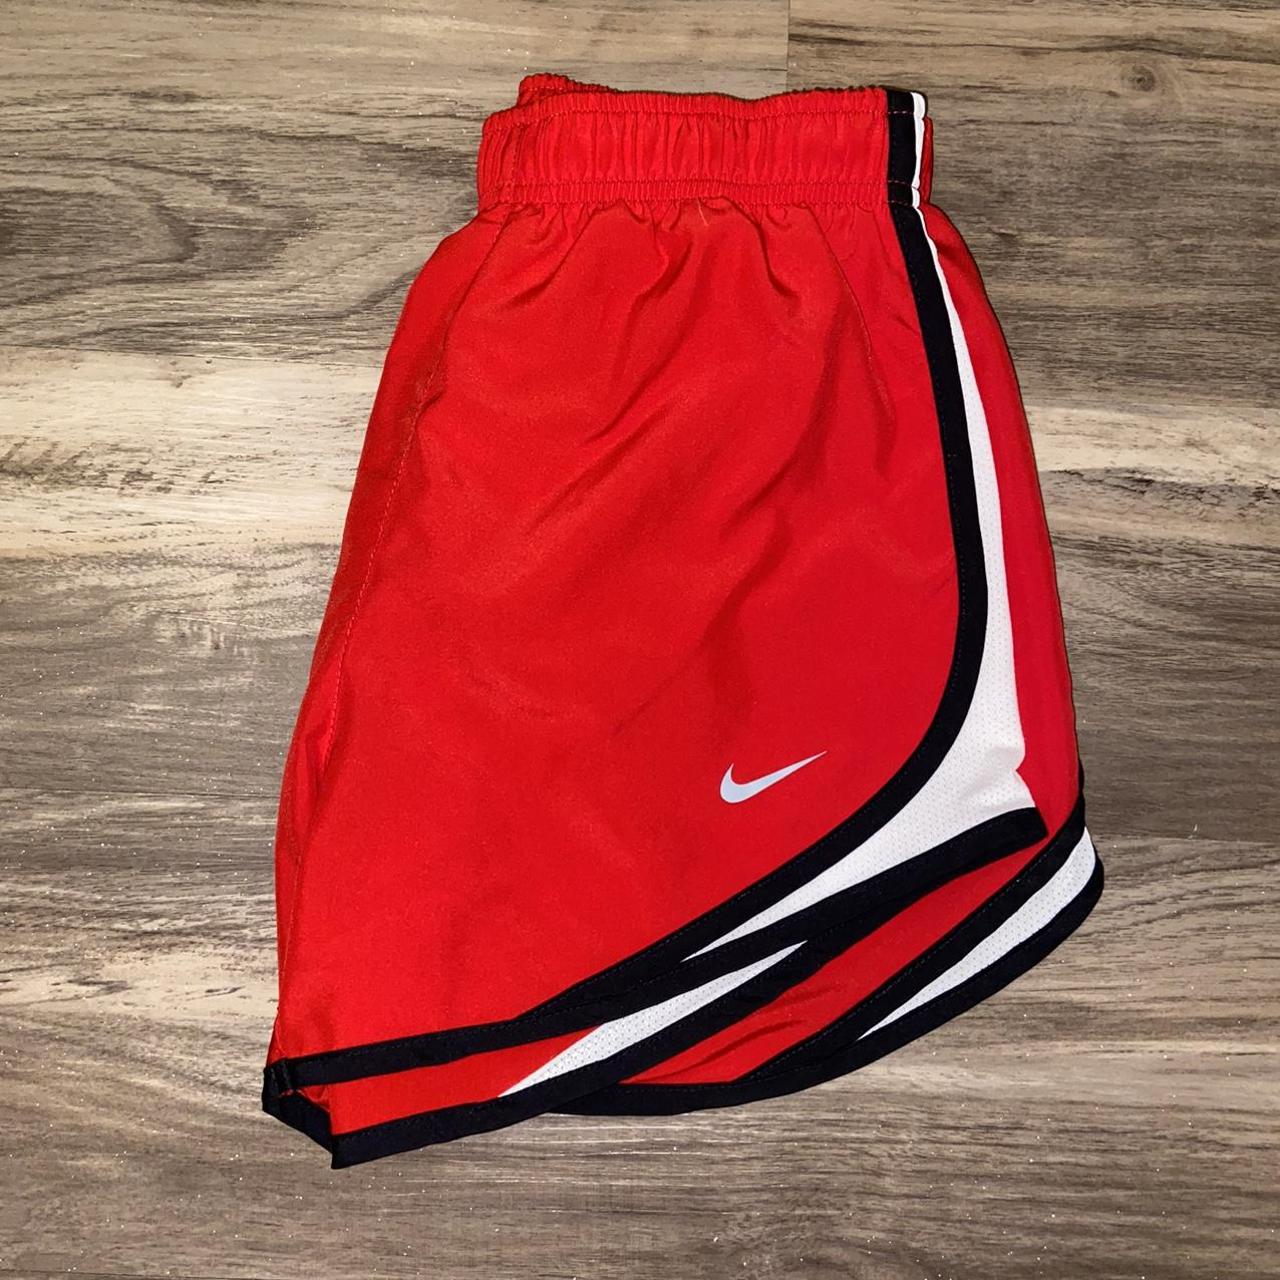 Nike red women’s athletic shorts , Barely worn